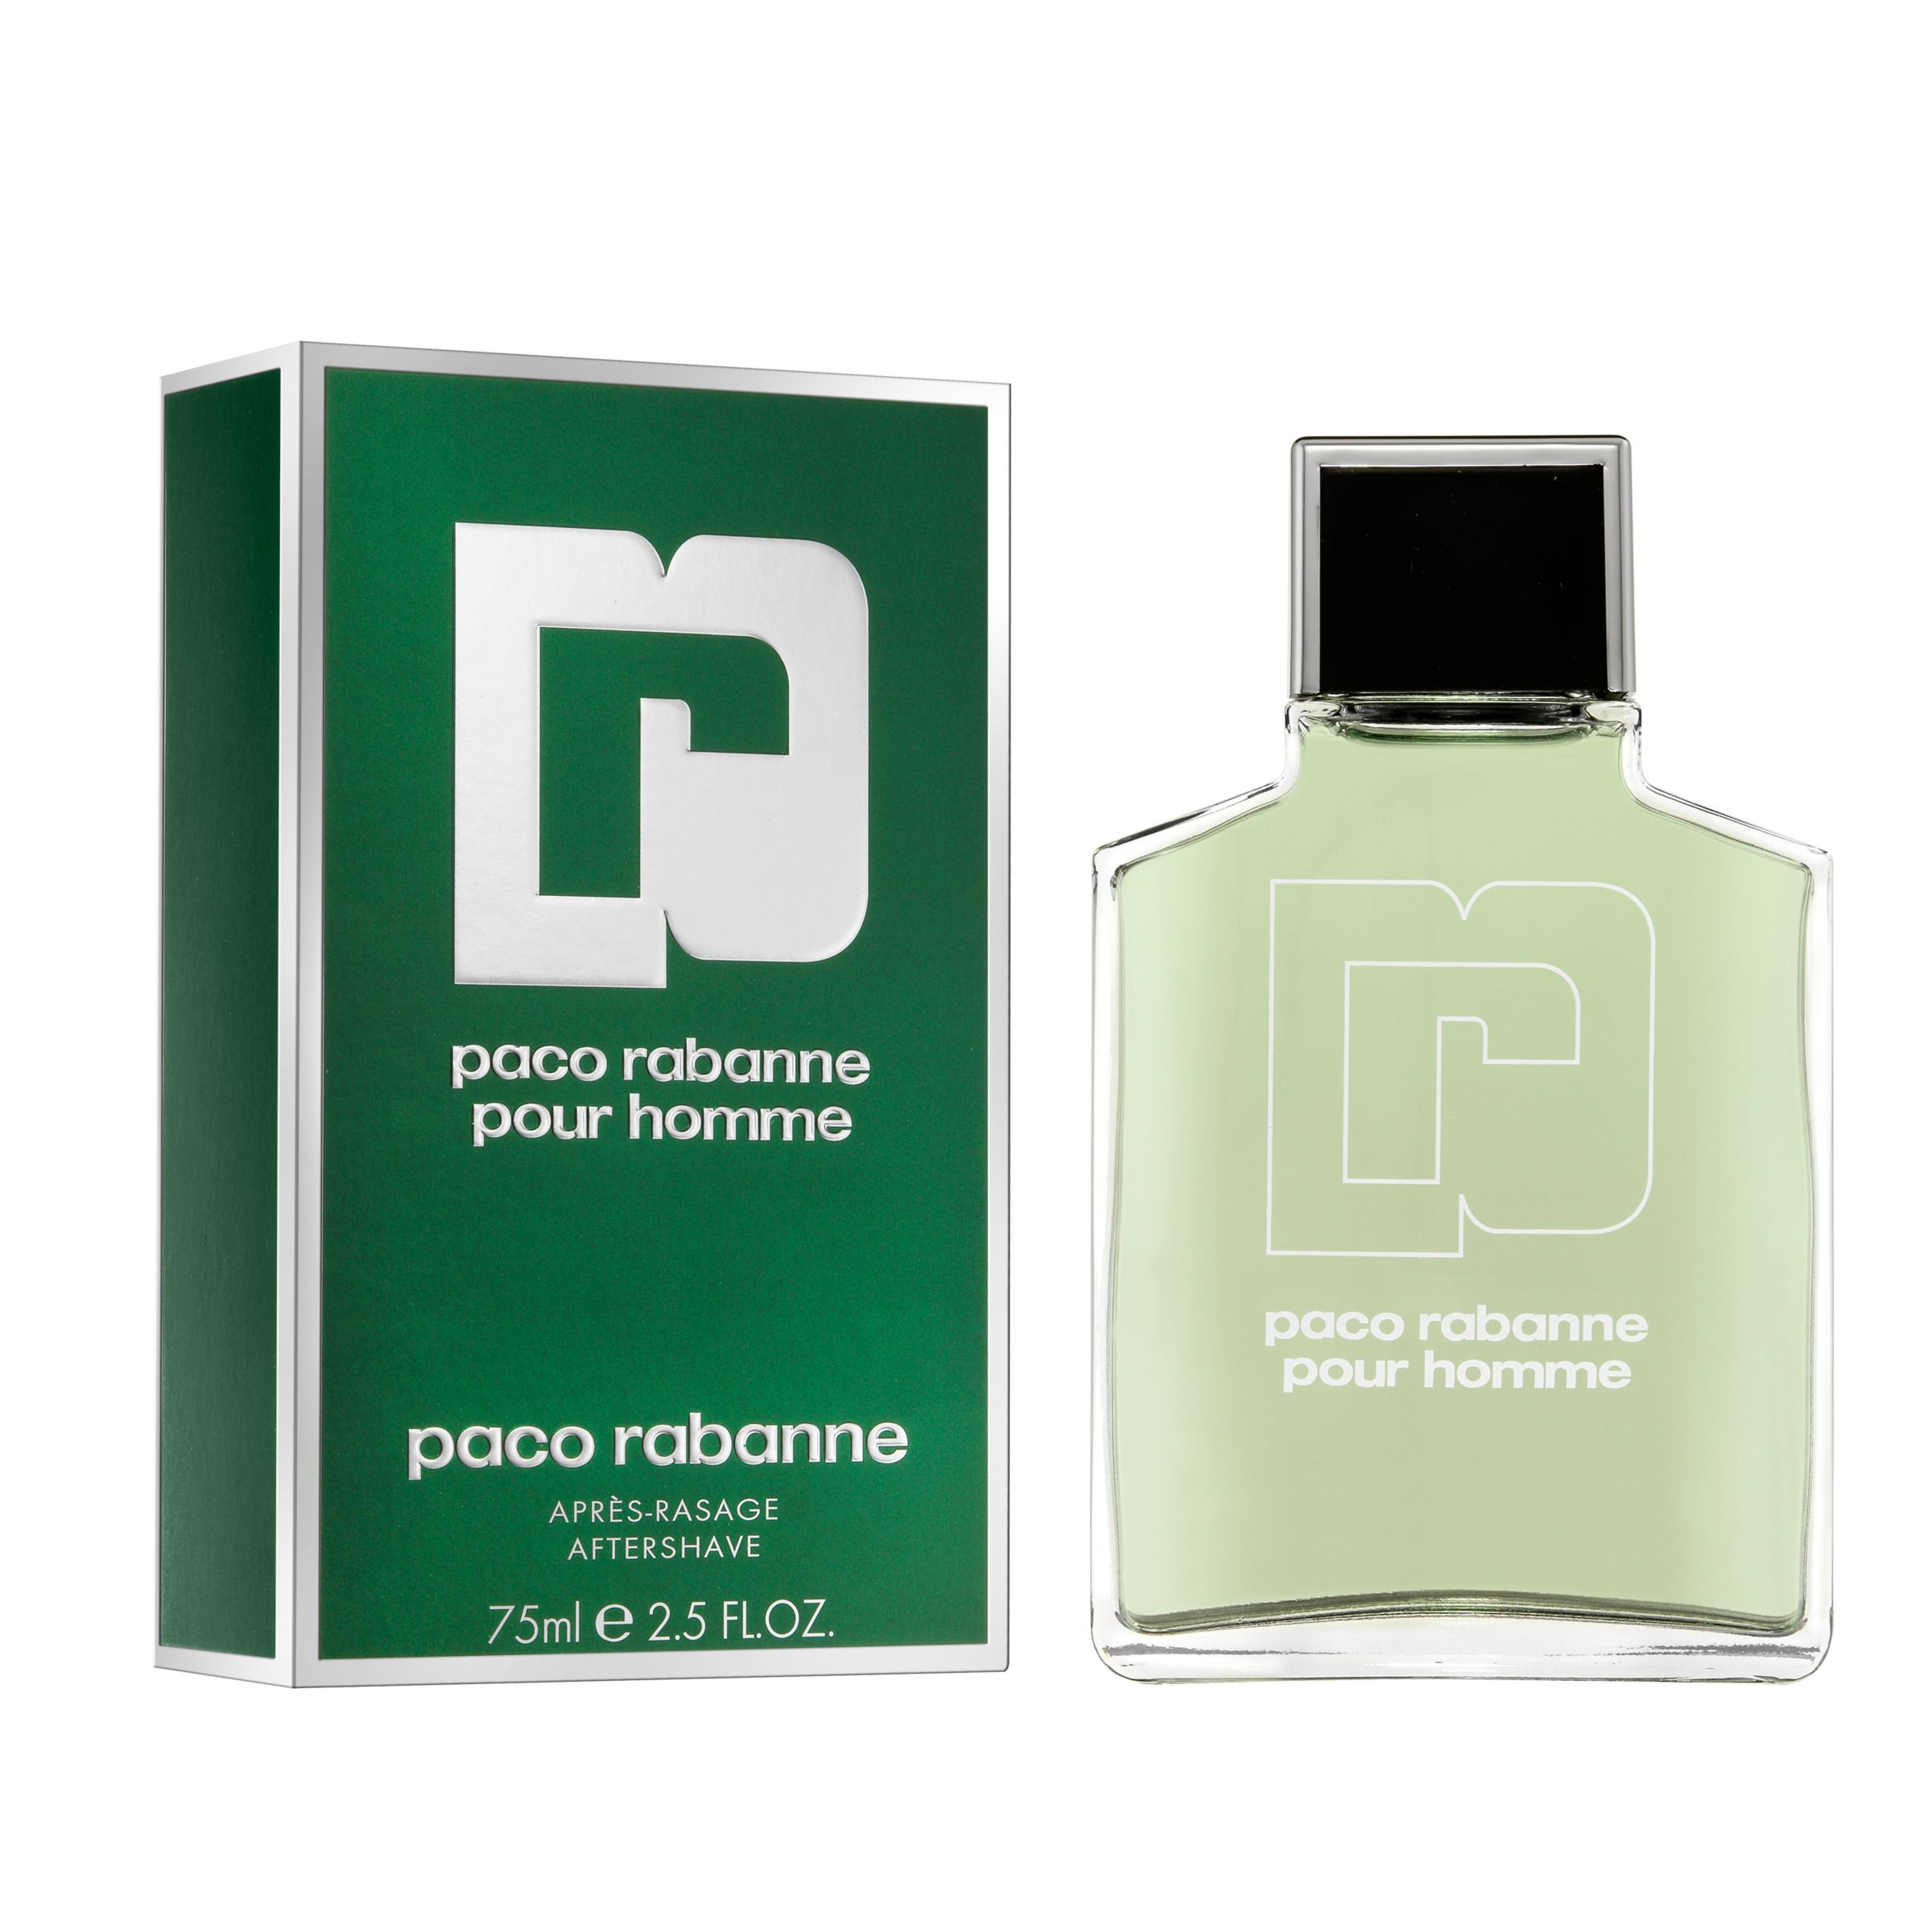 Paco Rabanne Limited Edition Aftershave, 75ml